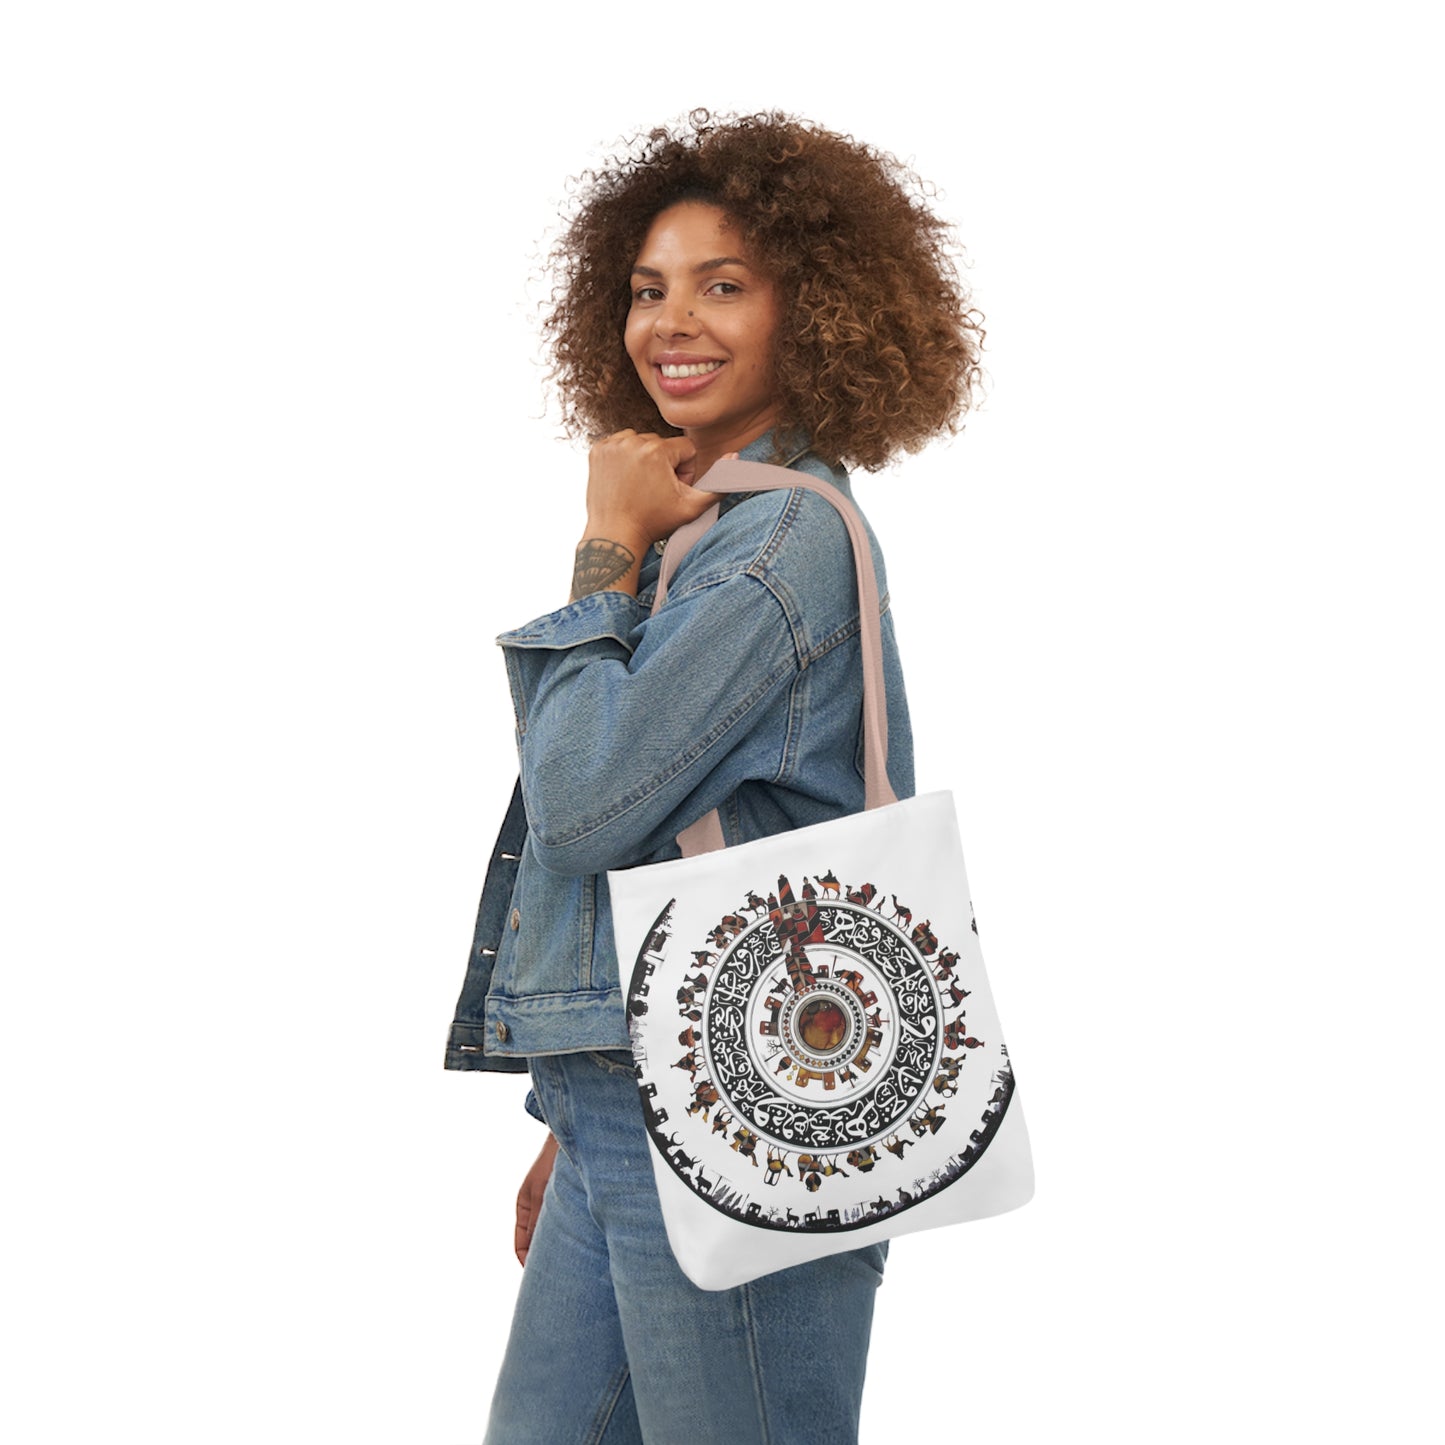 Cycle of Life 2 Canvas Tote Bag